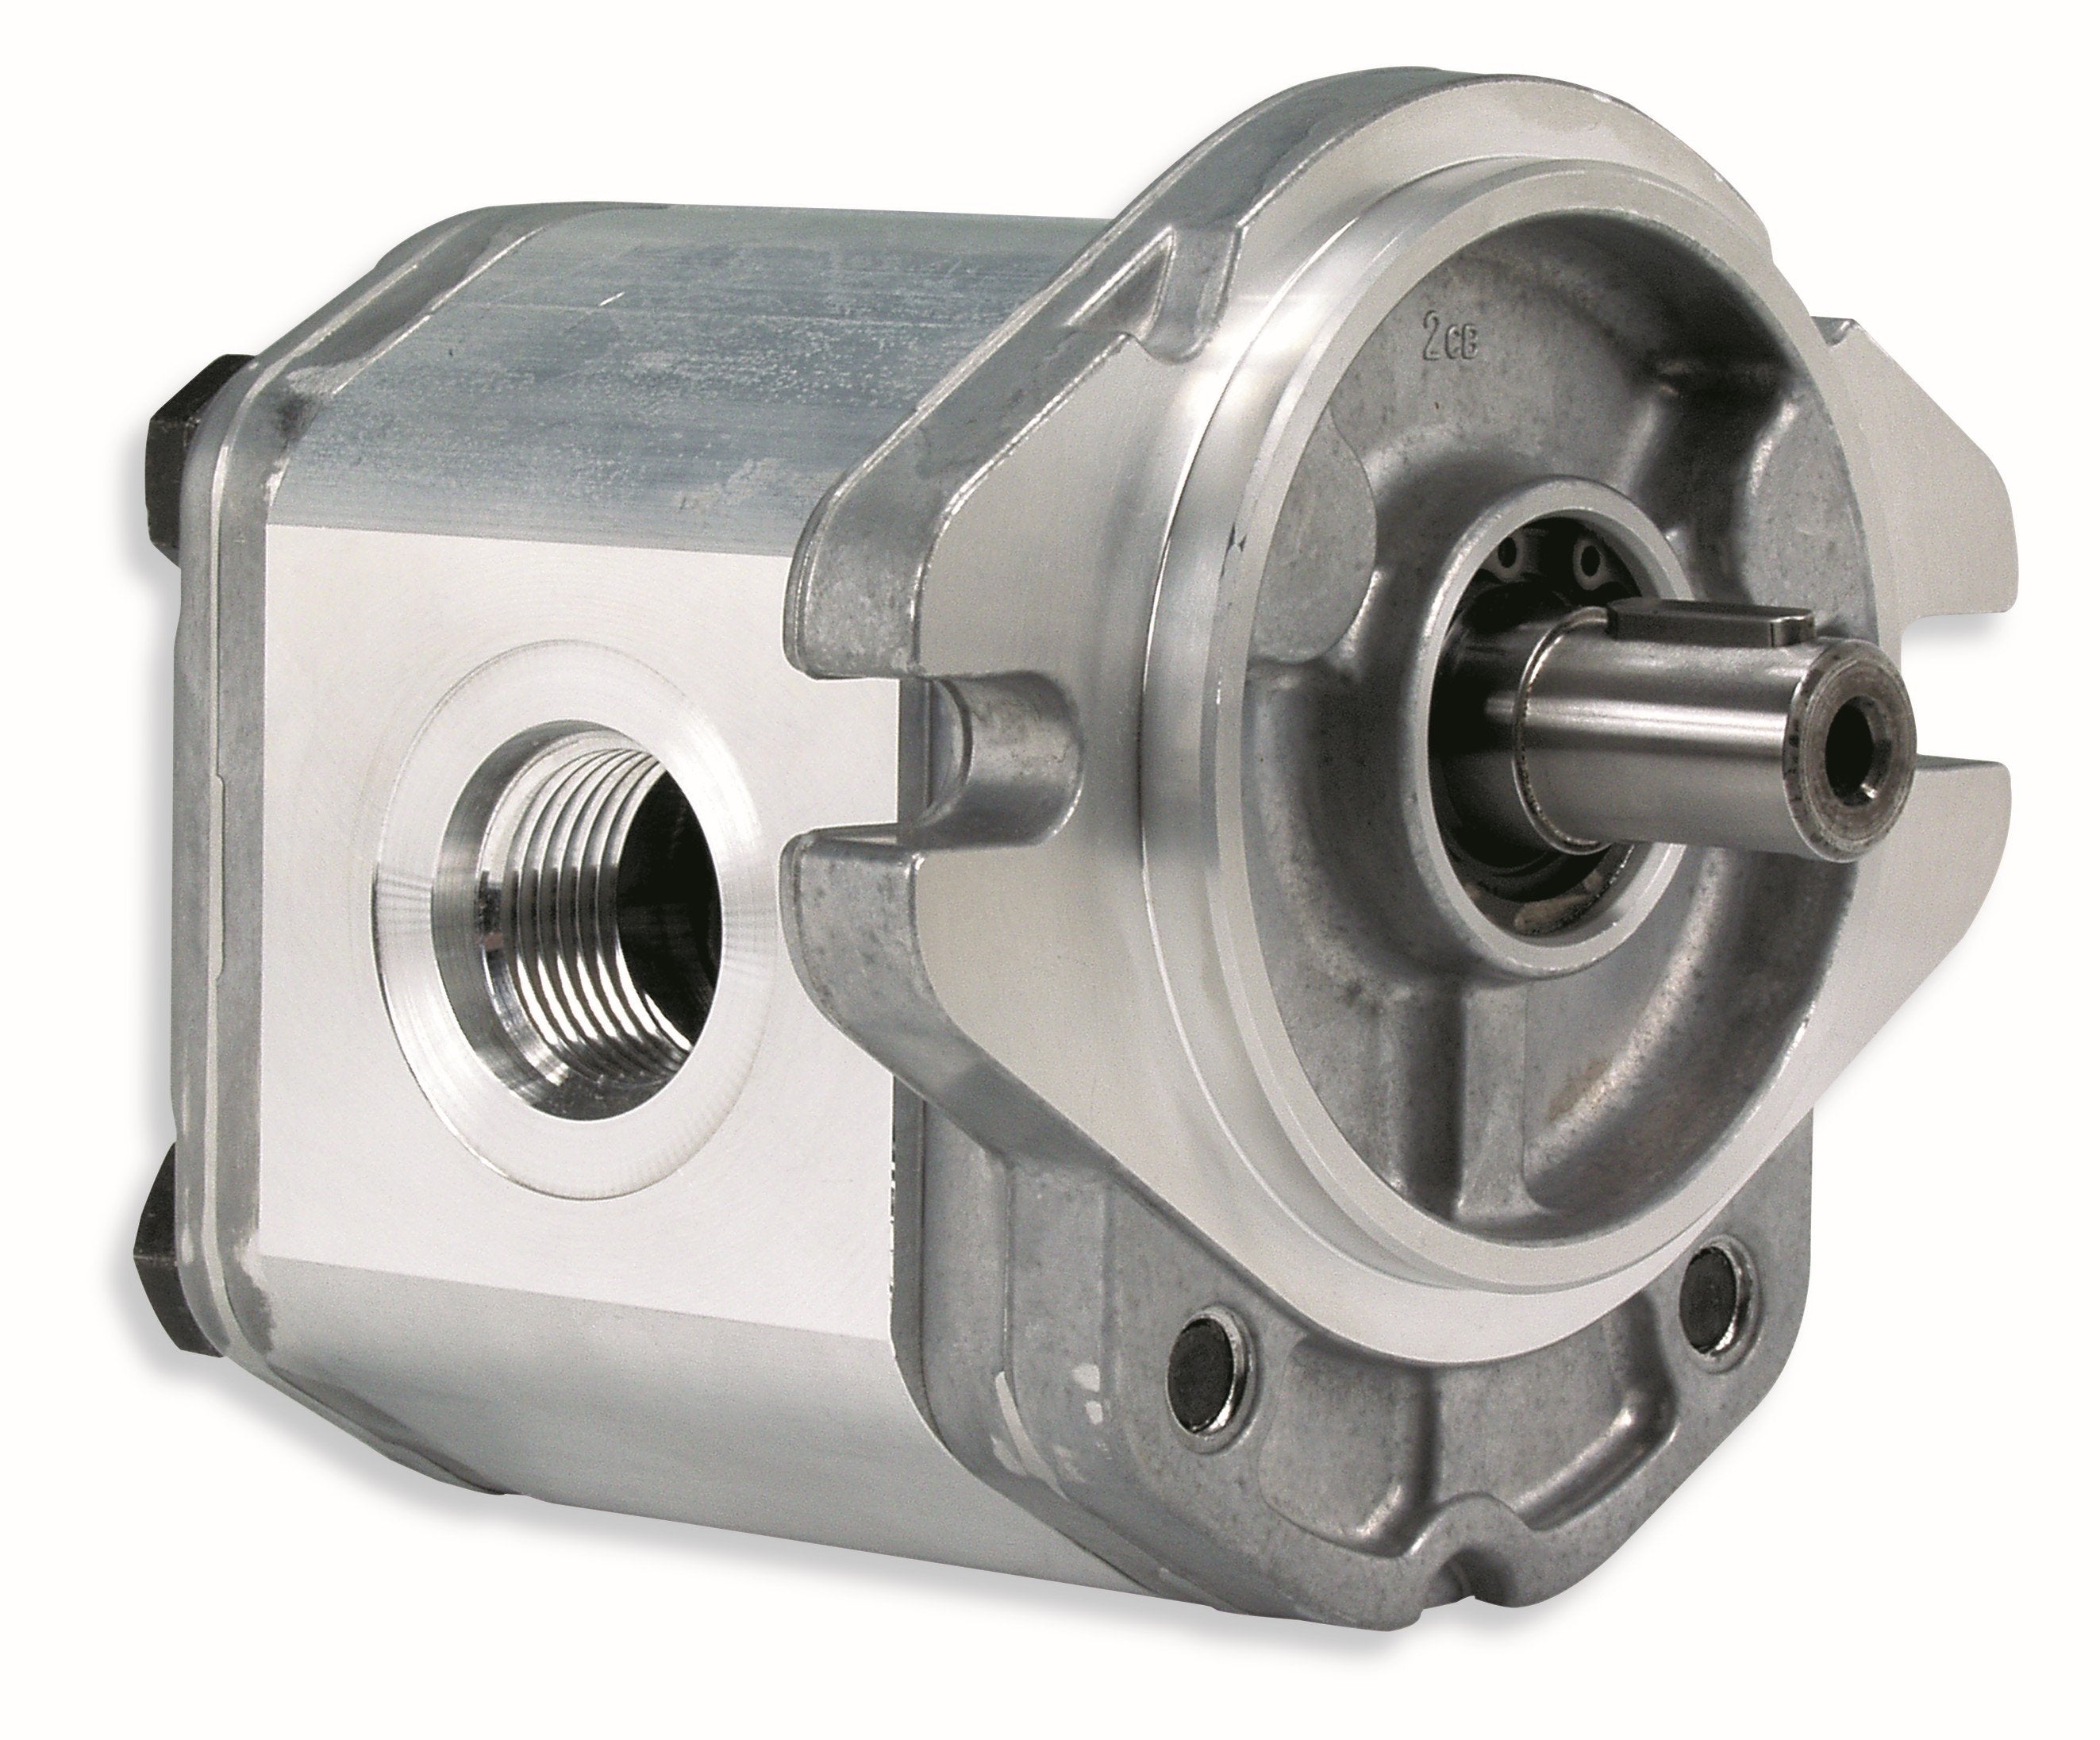 GHM2A-R-9-S1-E2 : Marzocchi Gear Motor, Bidirectional, 6.4cc, 4060psi rated, 4000RPM, 0.75 (3/4") #12 SAE ports, 9T 16/32DP Splined Shaft